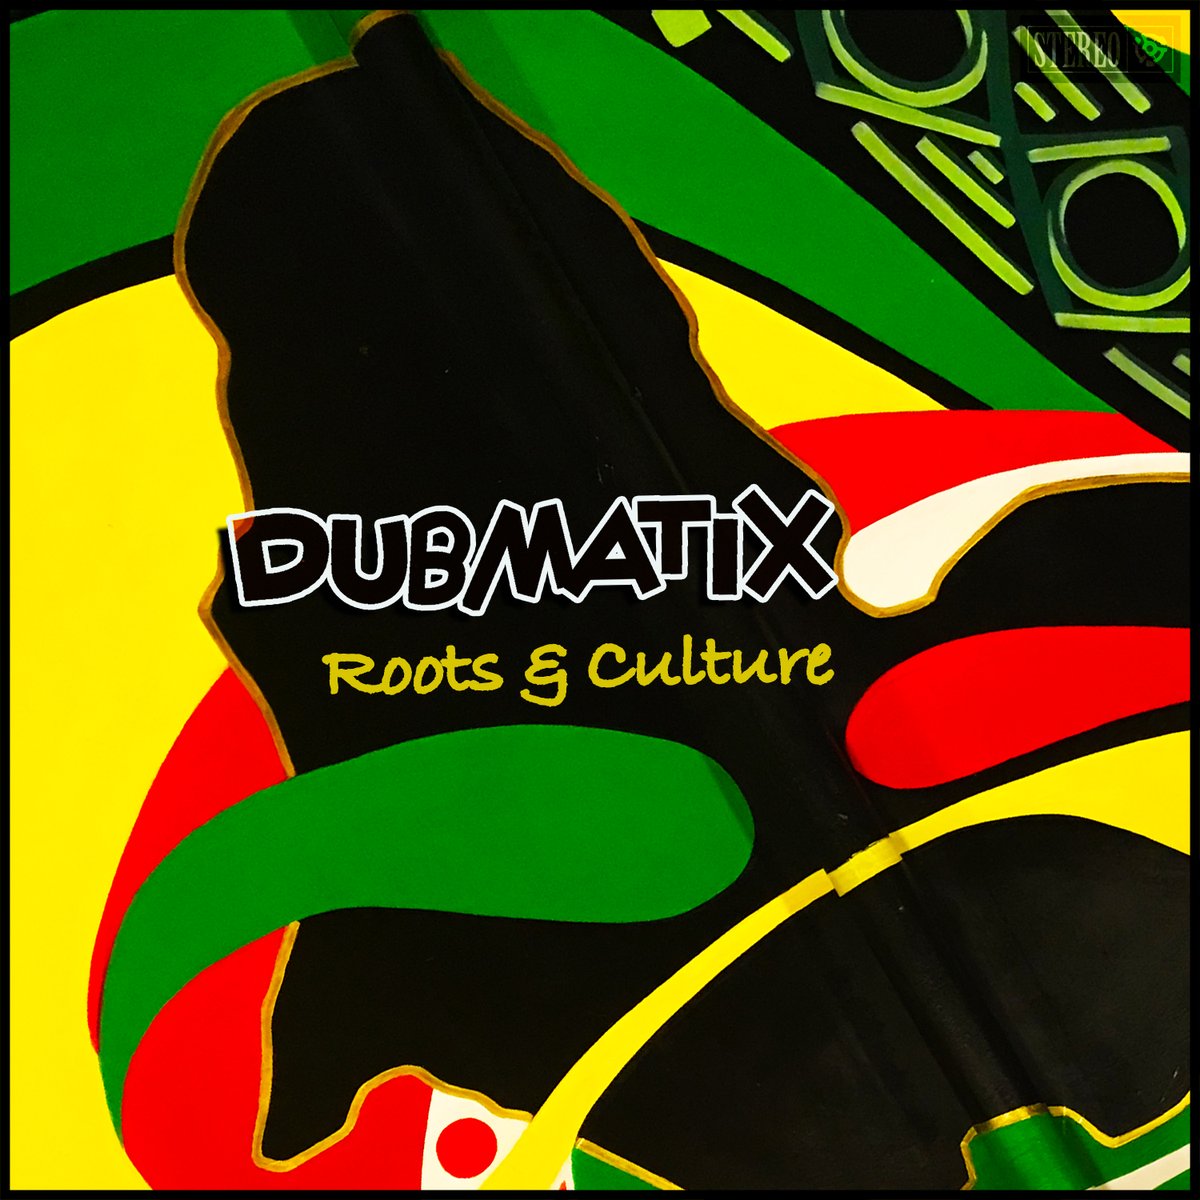 CHUNE: Roots & Culture

Greetings

Friday time and that means time for a new chune - the latest track 'Roots & Culture' goes back to the heavier side of 70s-era dub ala King Tubby along with the original version.
dubmatix.bandcamp.com/album/roots-cu…

Cheers
Jesse Dubmatix